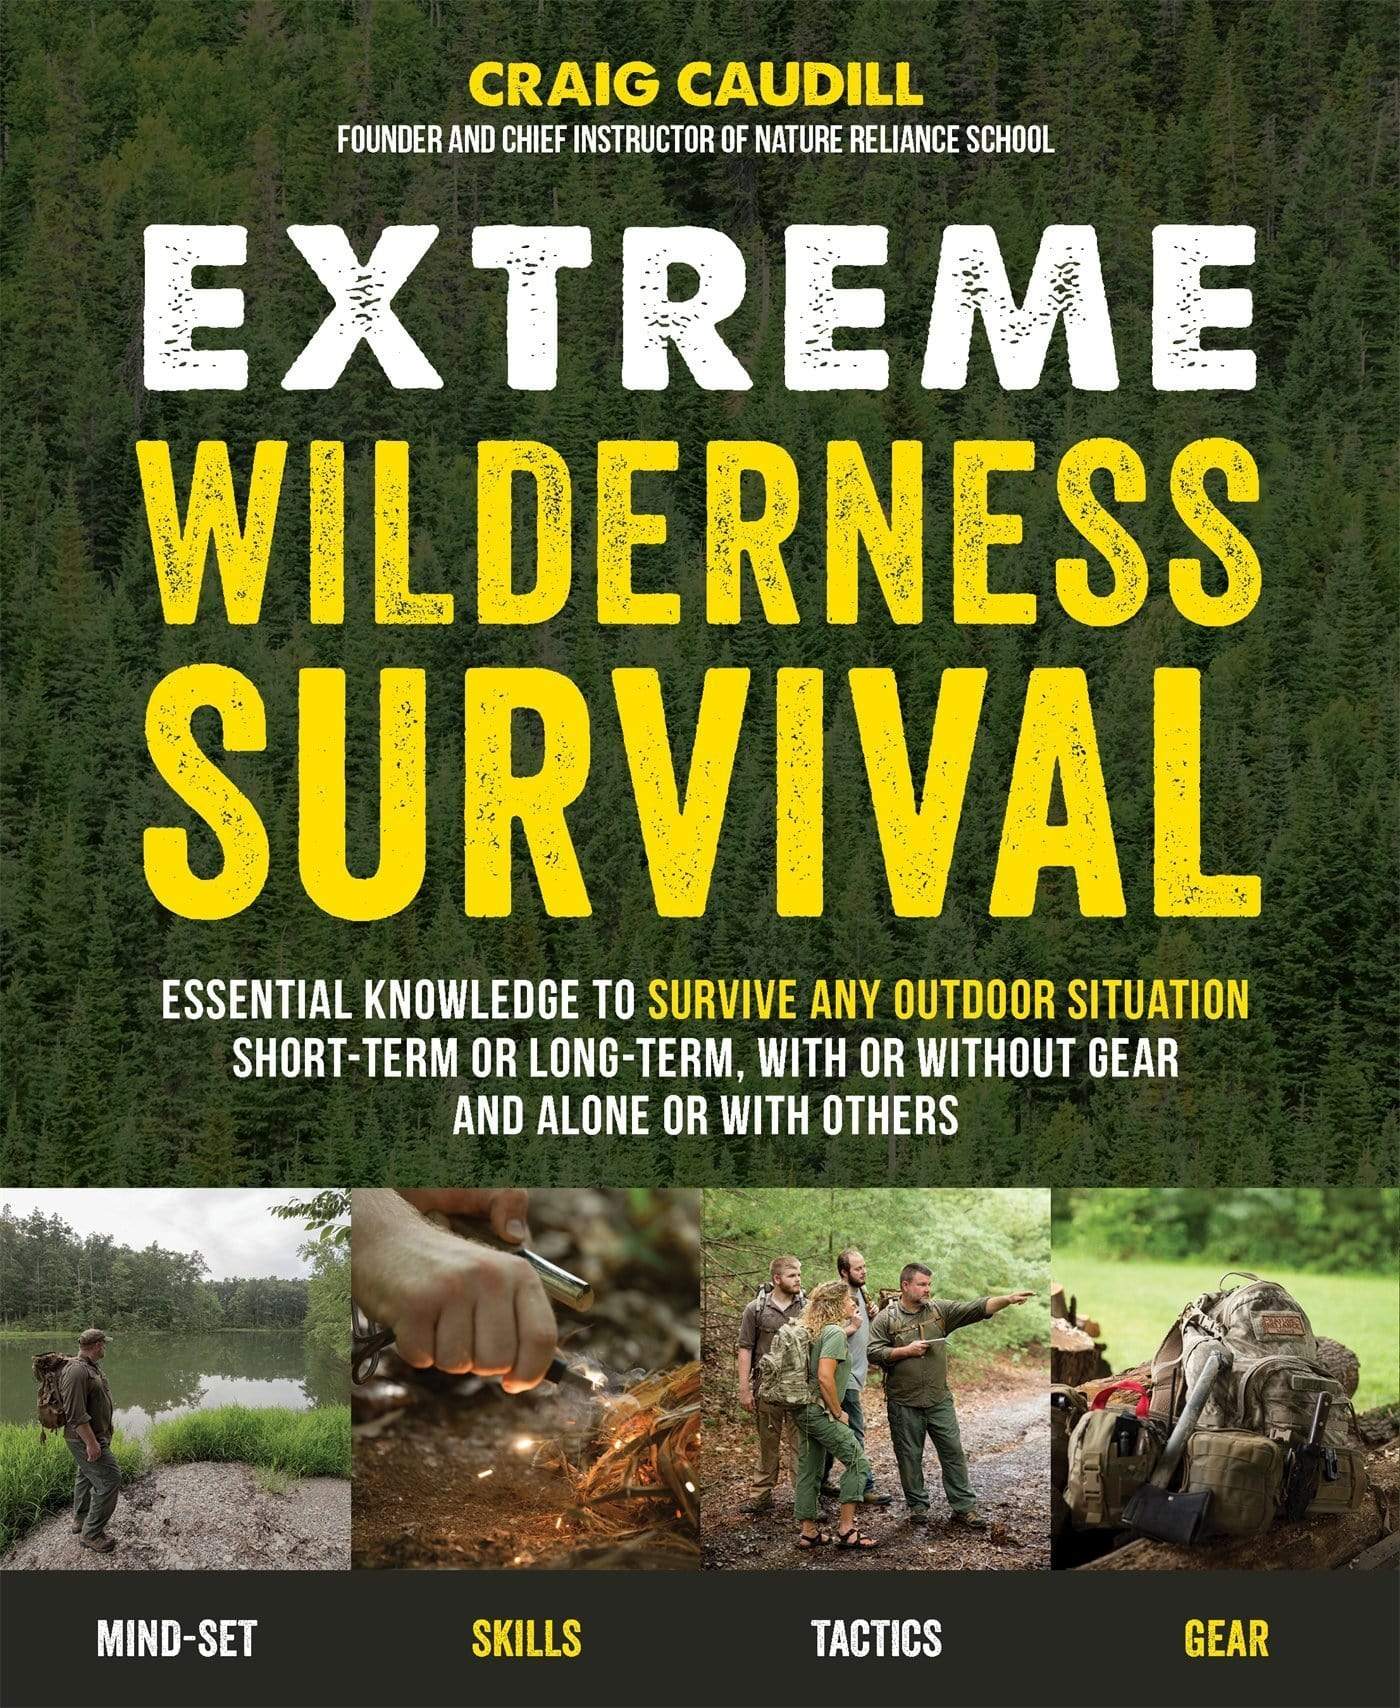 EXTREME WILDERNESS SURVIVAL: ESSENTIAL KNOWLEDGE TO SURVIVE ANY OUTDOOR SITUATION SHORT-TERM OR LONG-TERM, WITH OR WITHOUT GEAR AND ALONE OR WITH OTHERS